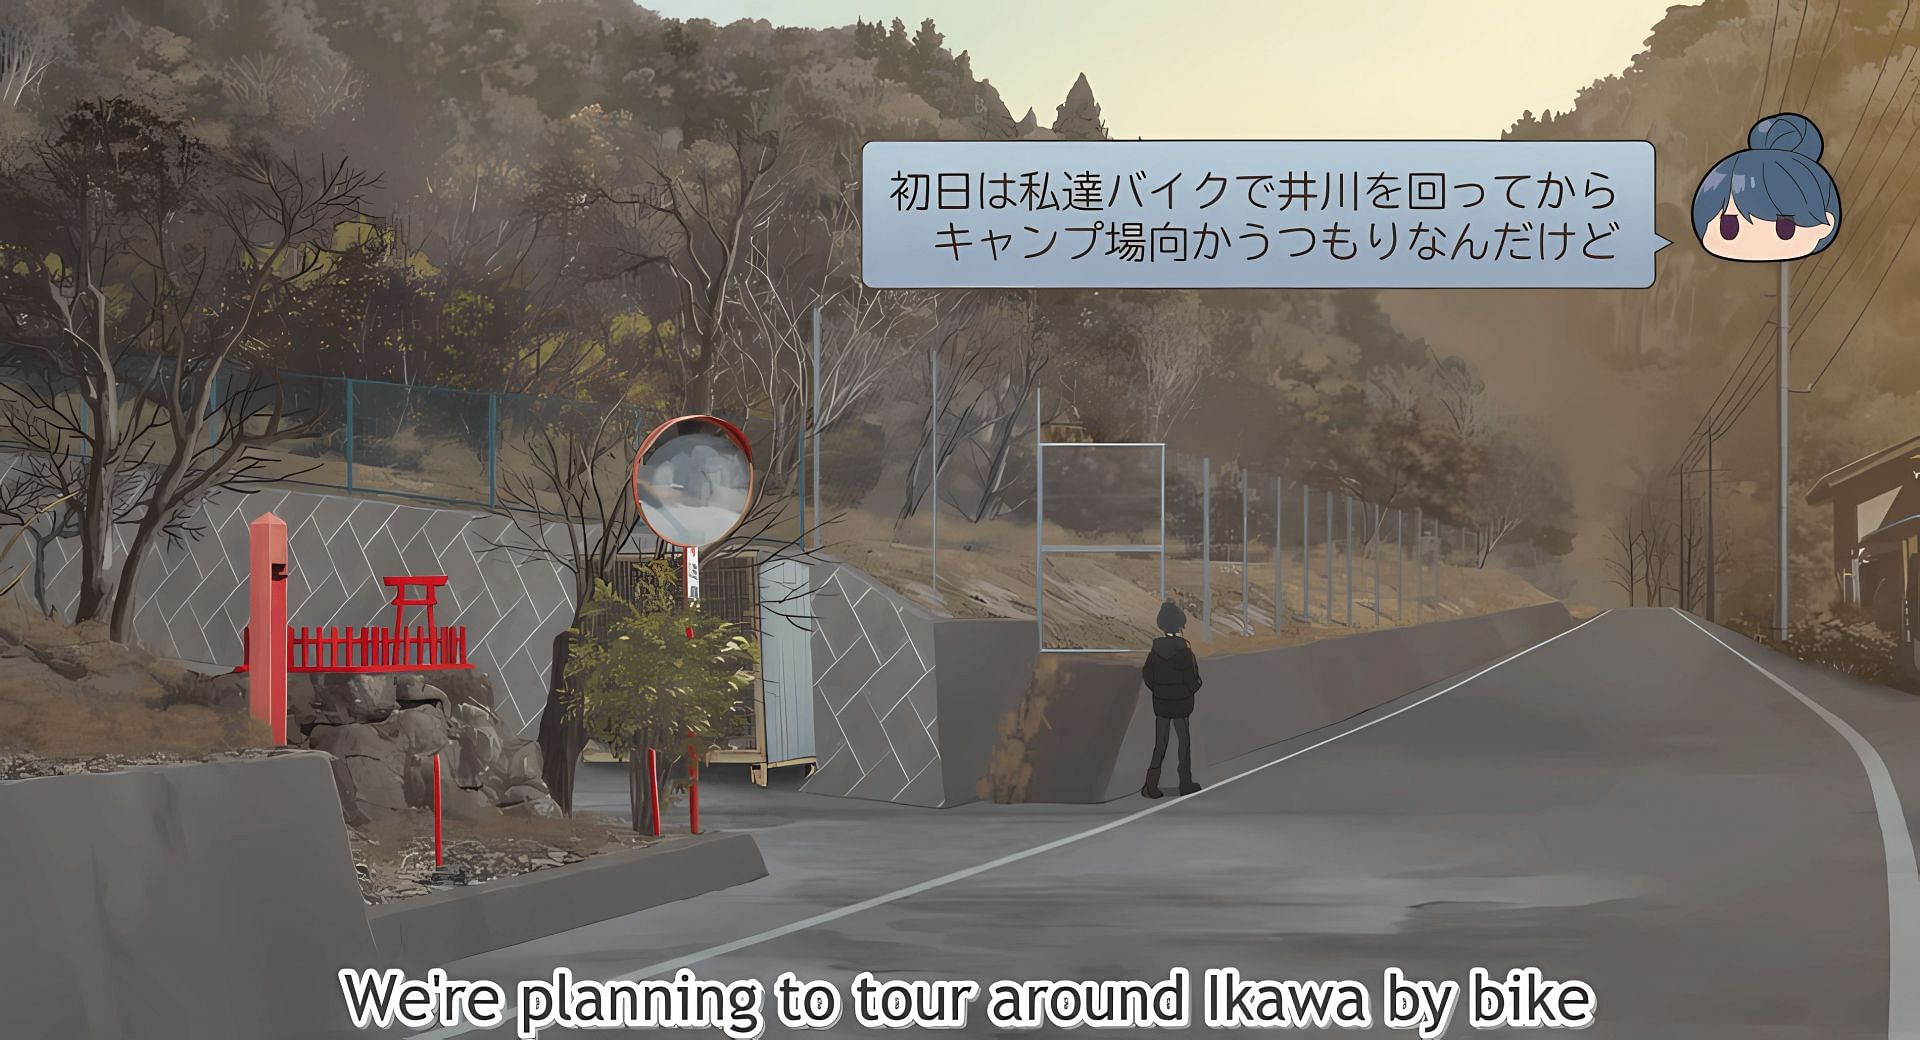 Rin explains her plans for the first day (Image via Studio 8bit)